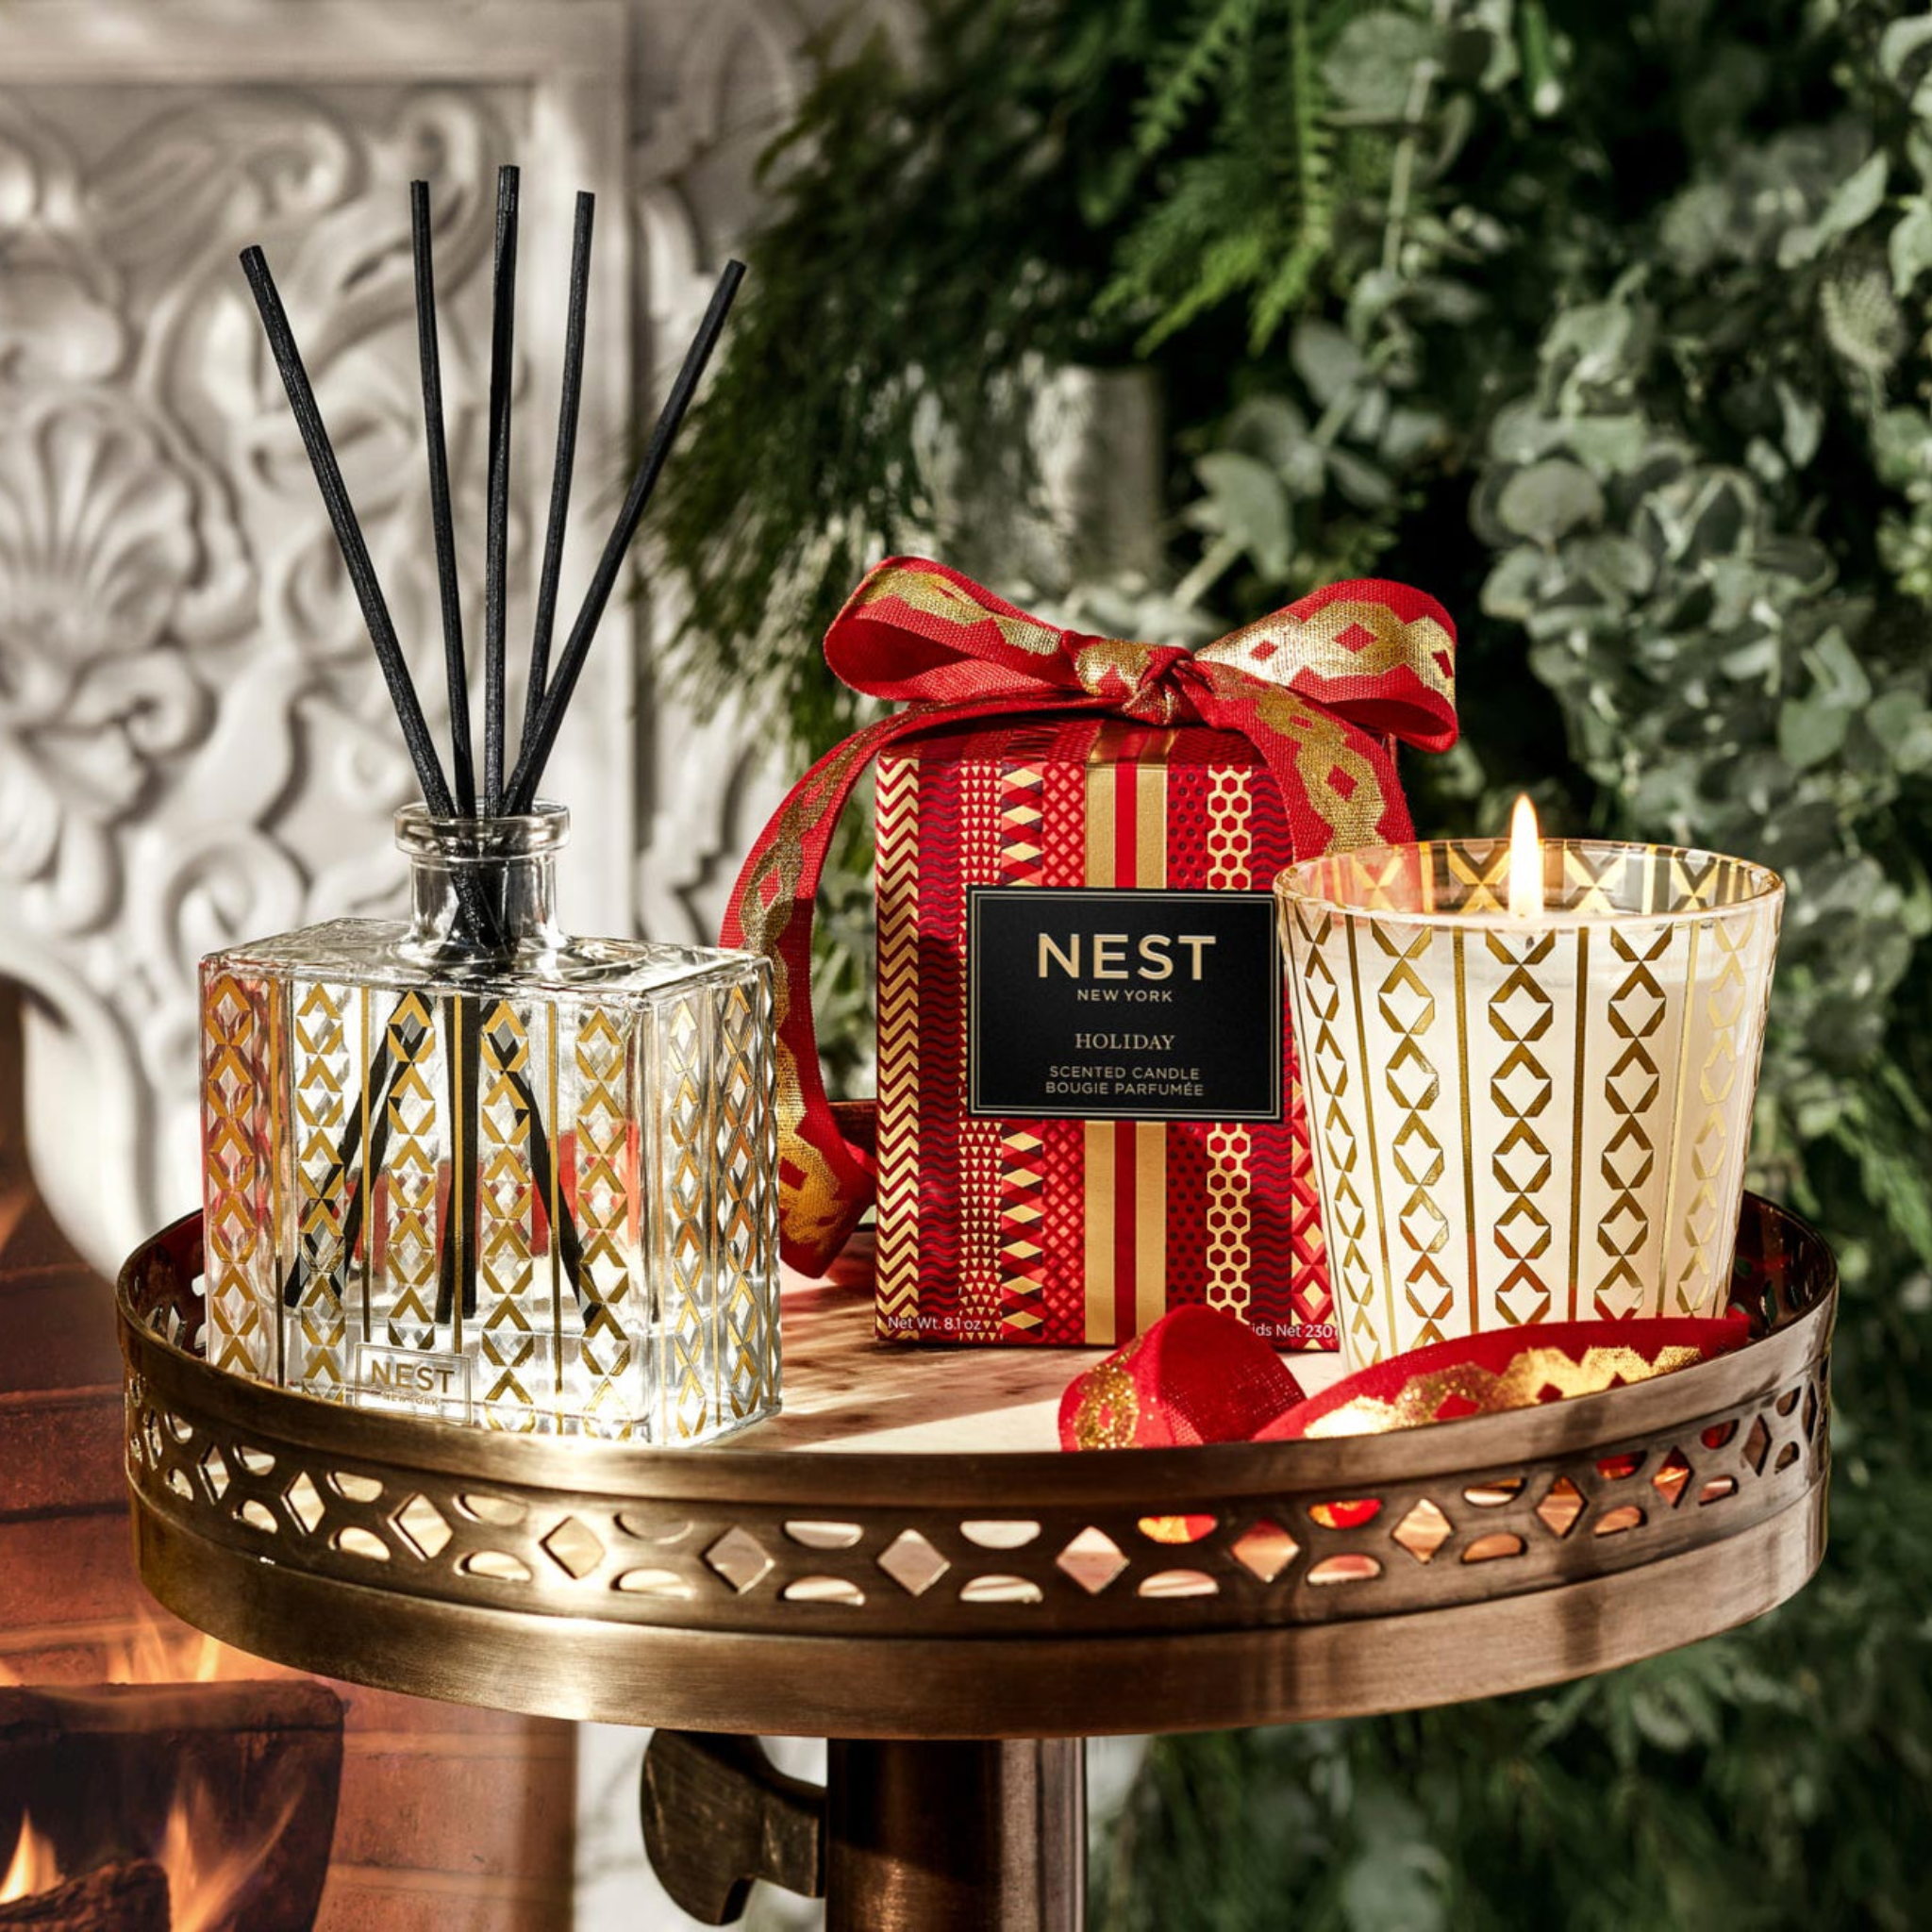 Nest New York Seasonal Candles and Diffuser